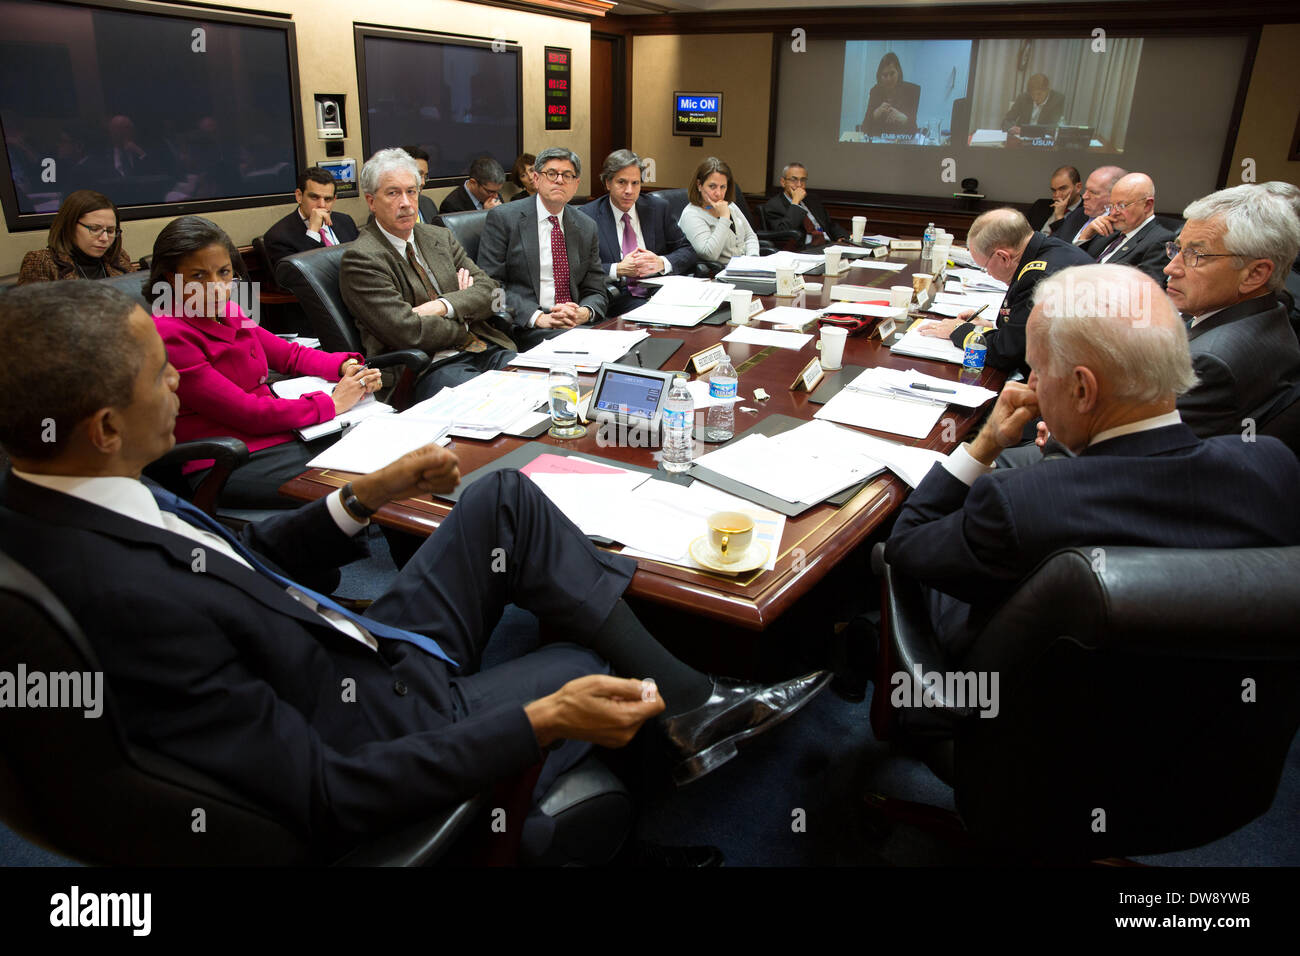 US President Barack Obama convenes a National Security Council meeting to discuss the crisis in Ukraine in the Situation Room of the White House March 3, 2014 in Washington, DC. Stock Photo